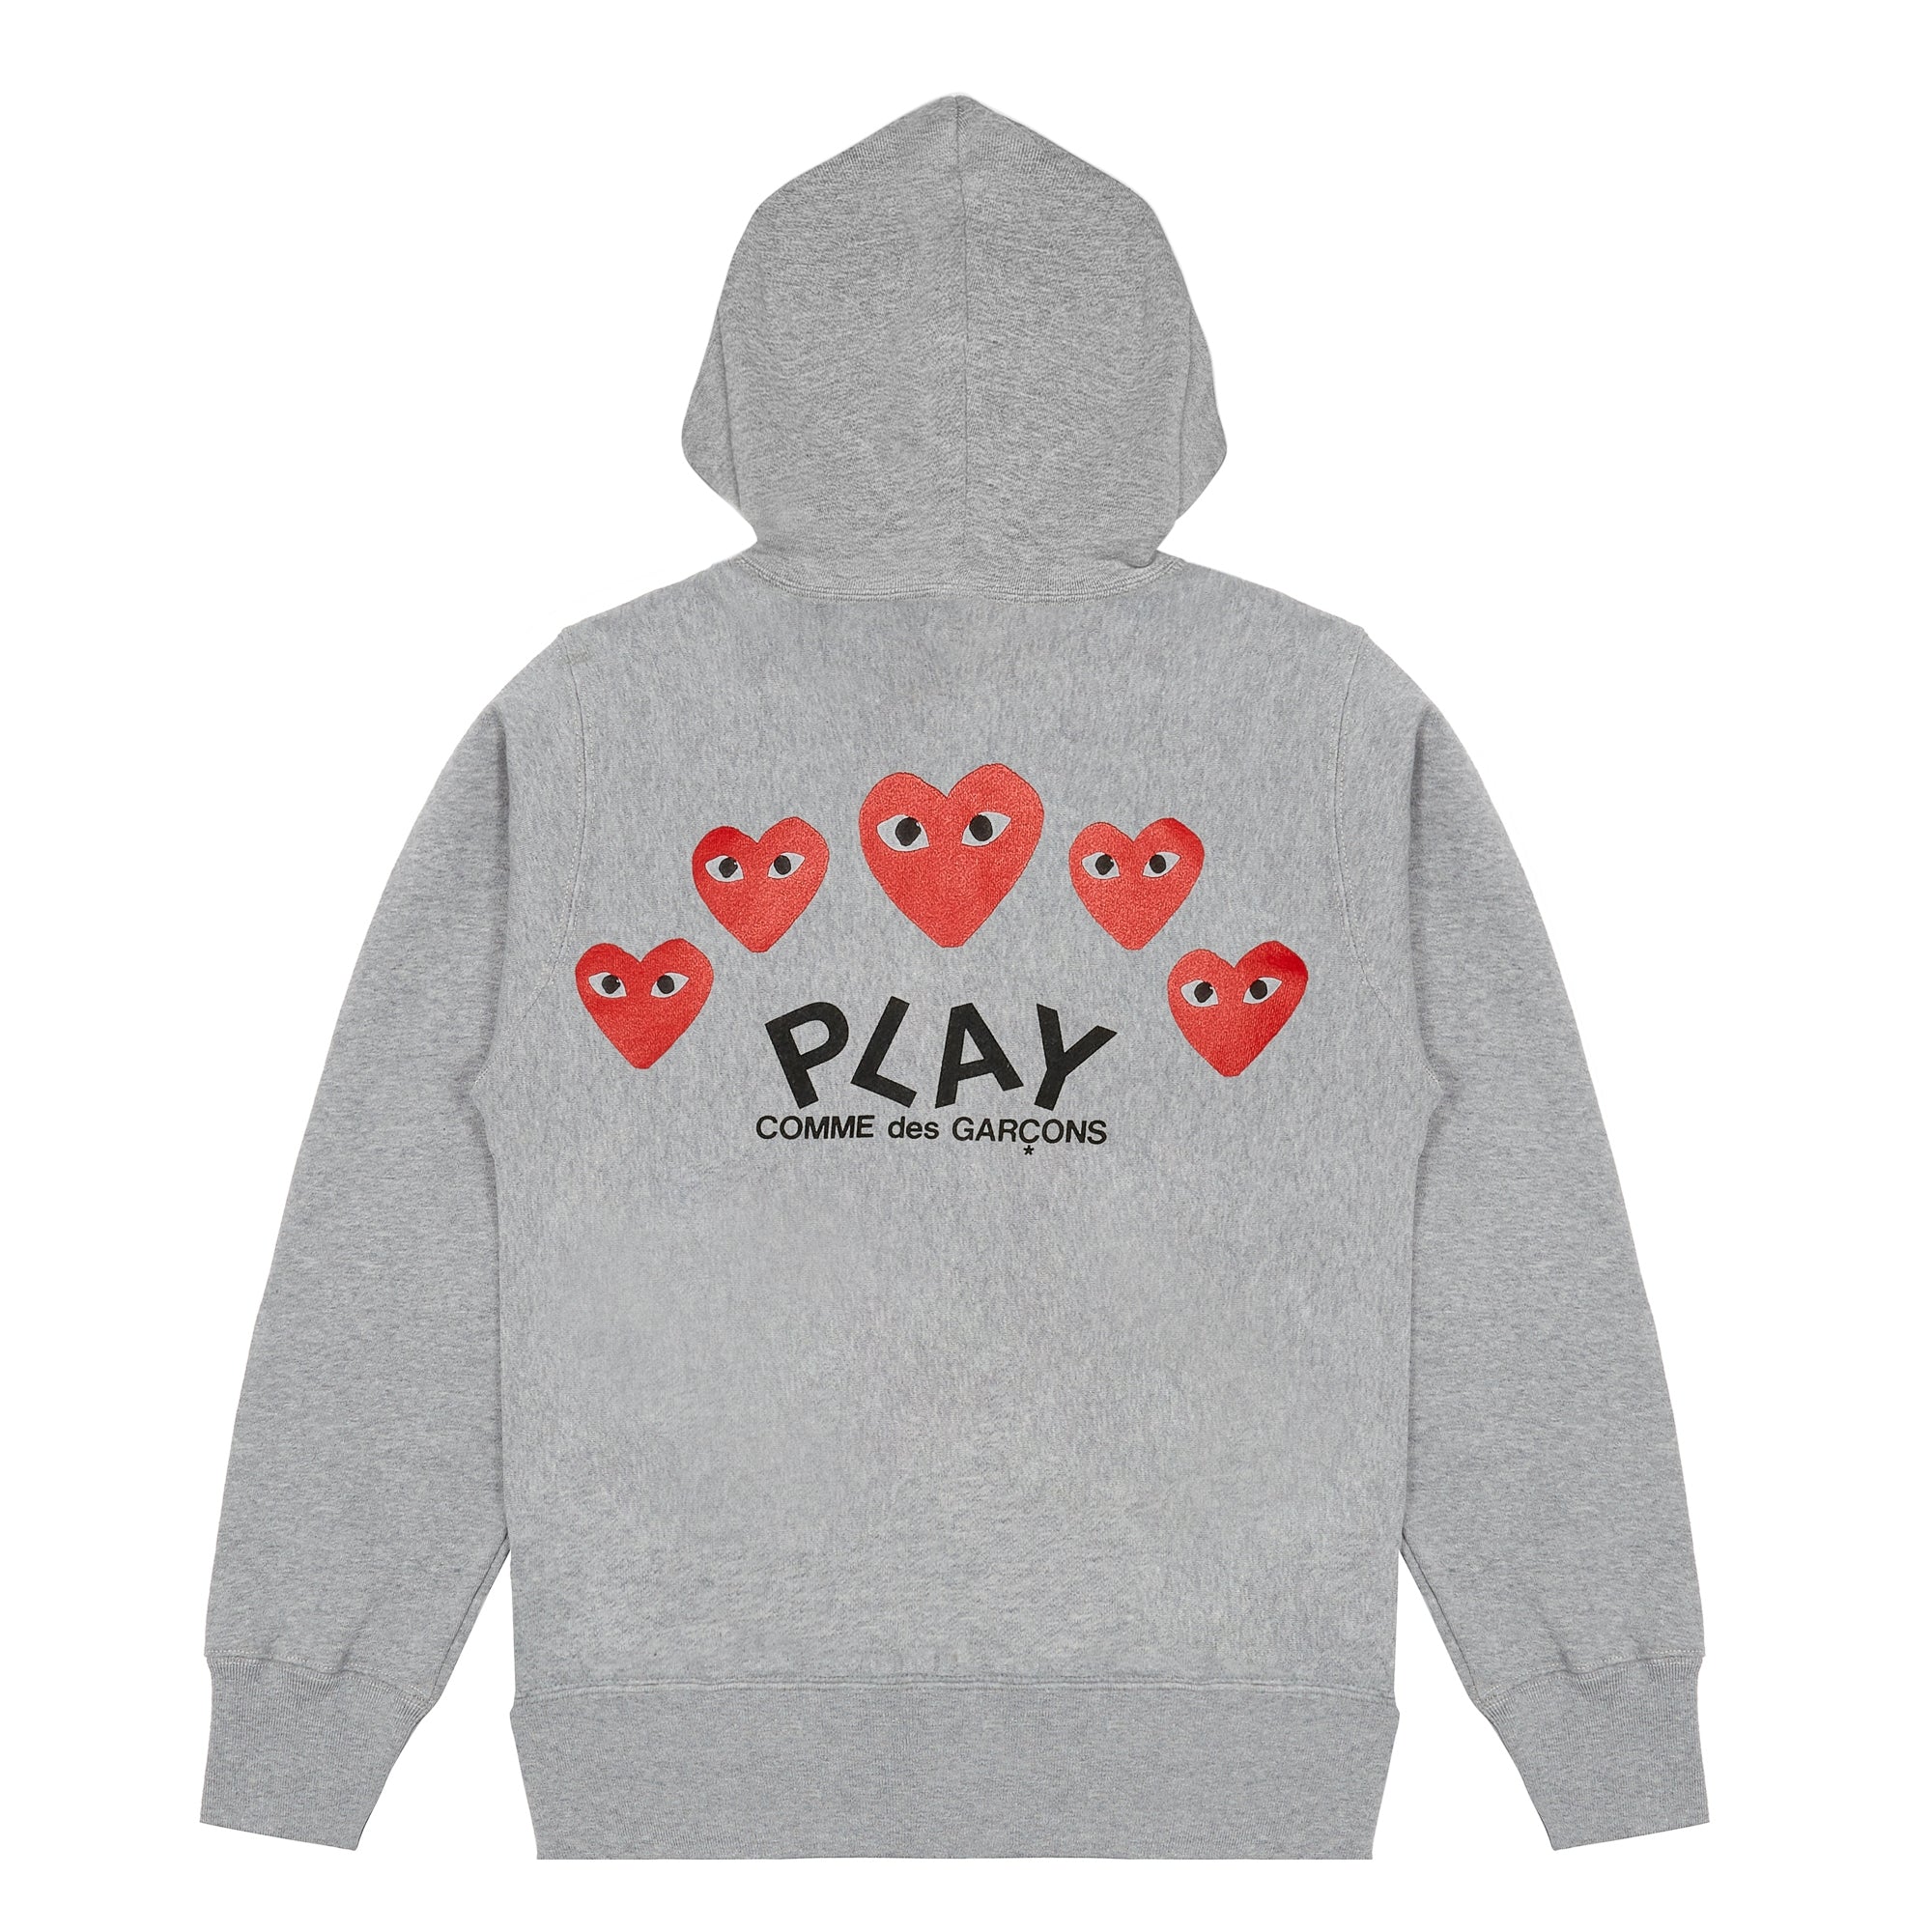 PLAY CDG - Hooded Sweatshirt With 5 Hearts - (Grey) view 1